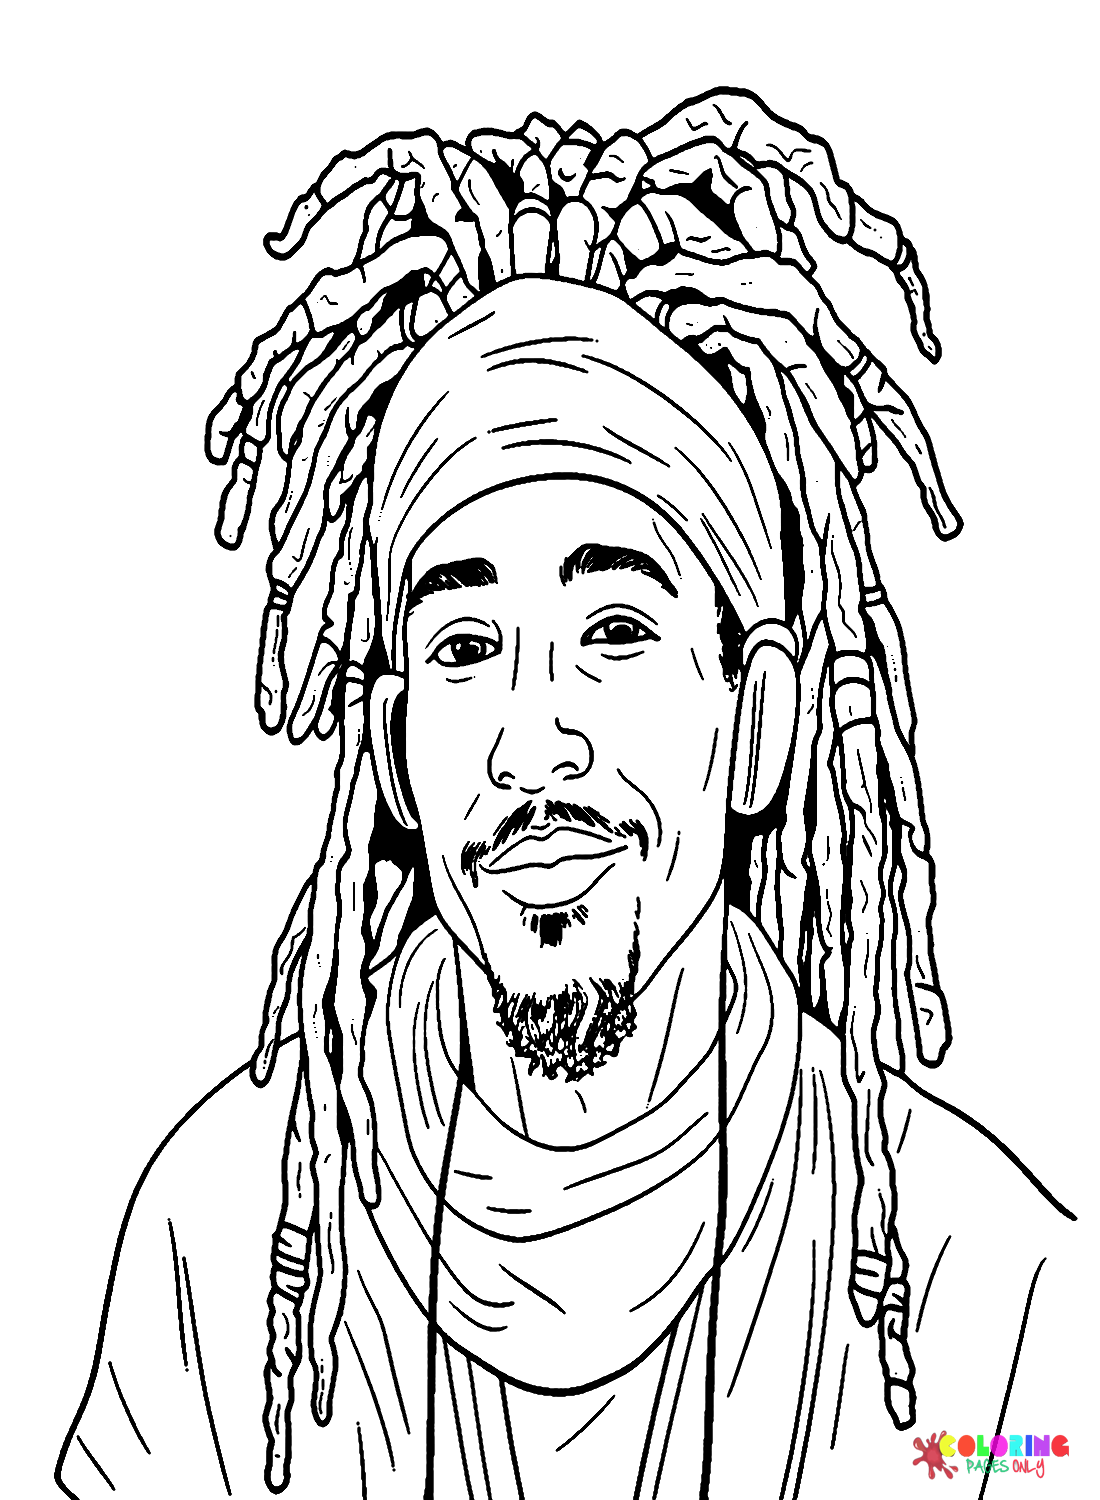 Man with Dreadlocks Coloring Page